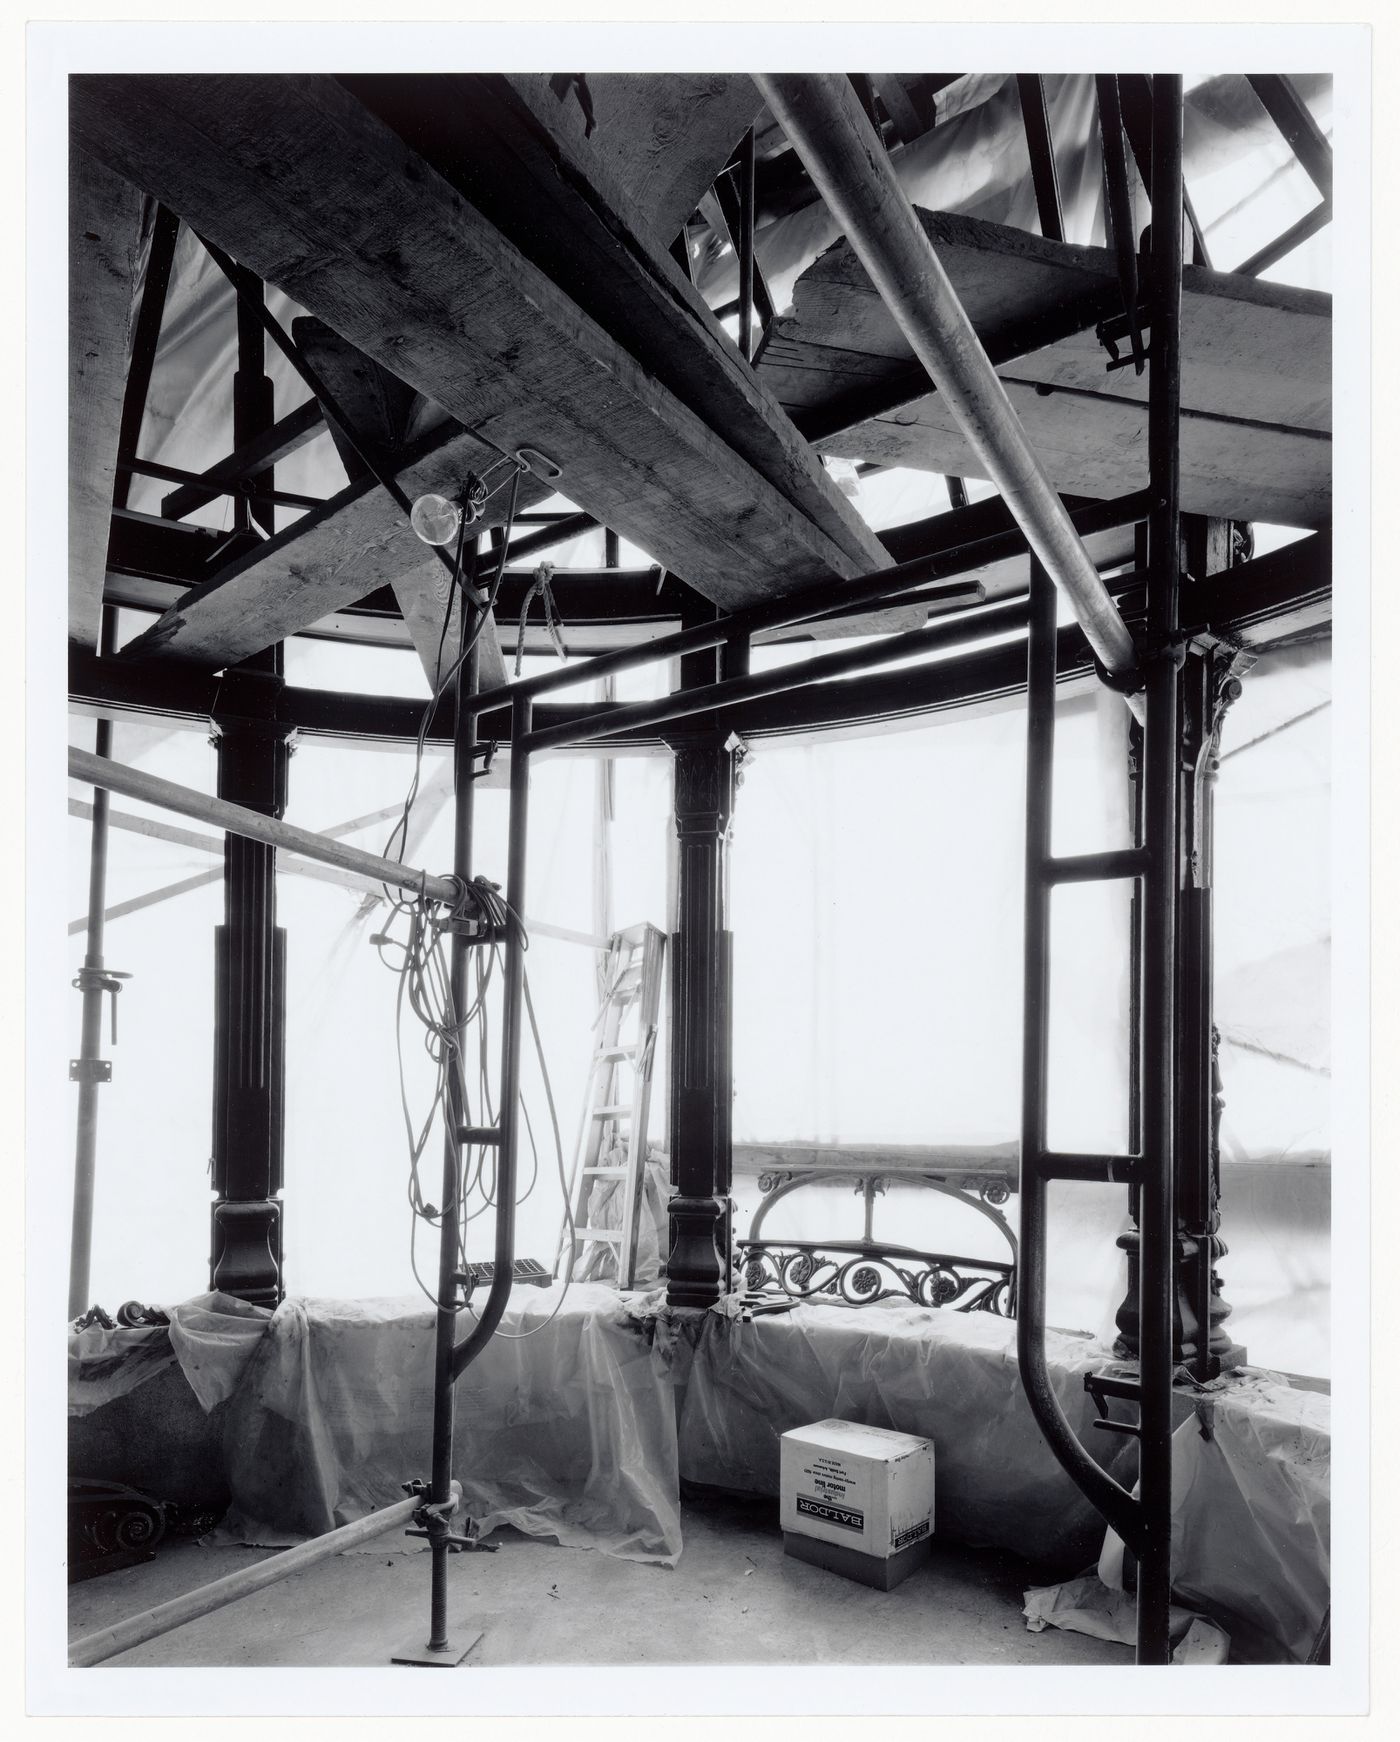 Interior view of the conservatory showing scaffolds, Shaughnessy House under renovation, Montréal, Québec